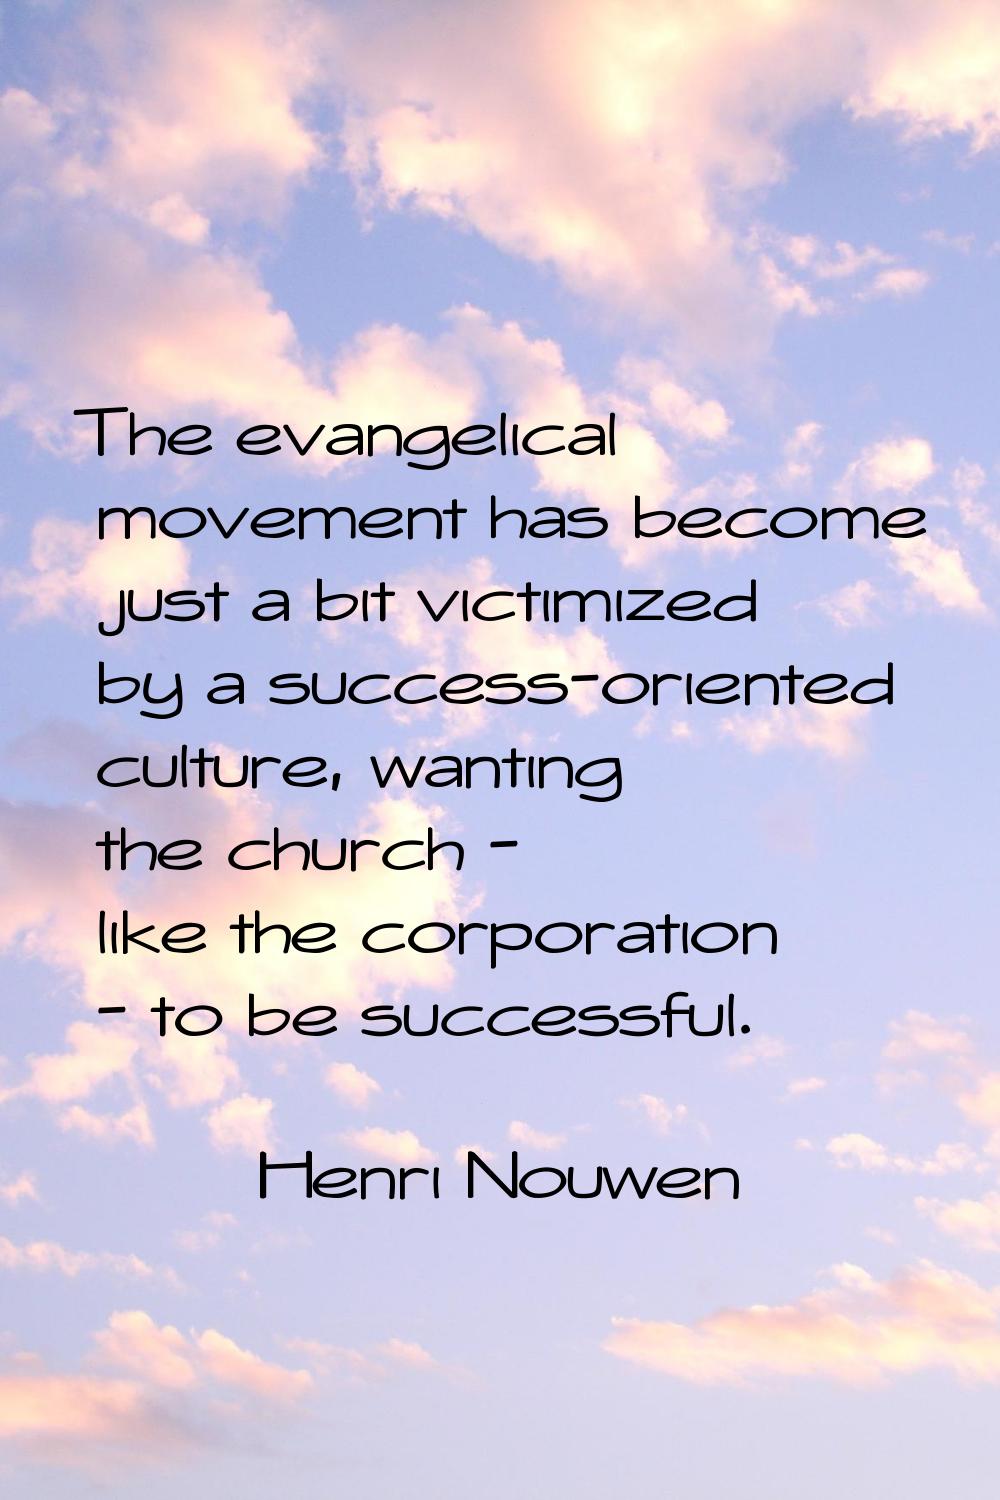 The evangelical movement has become just a bit victimized by a success-oriented culture, wanting th